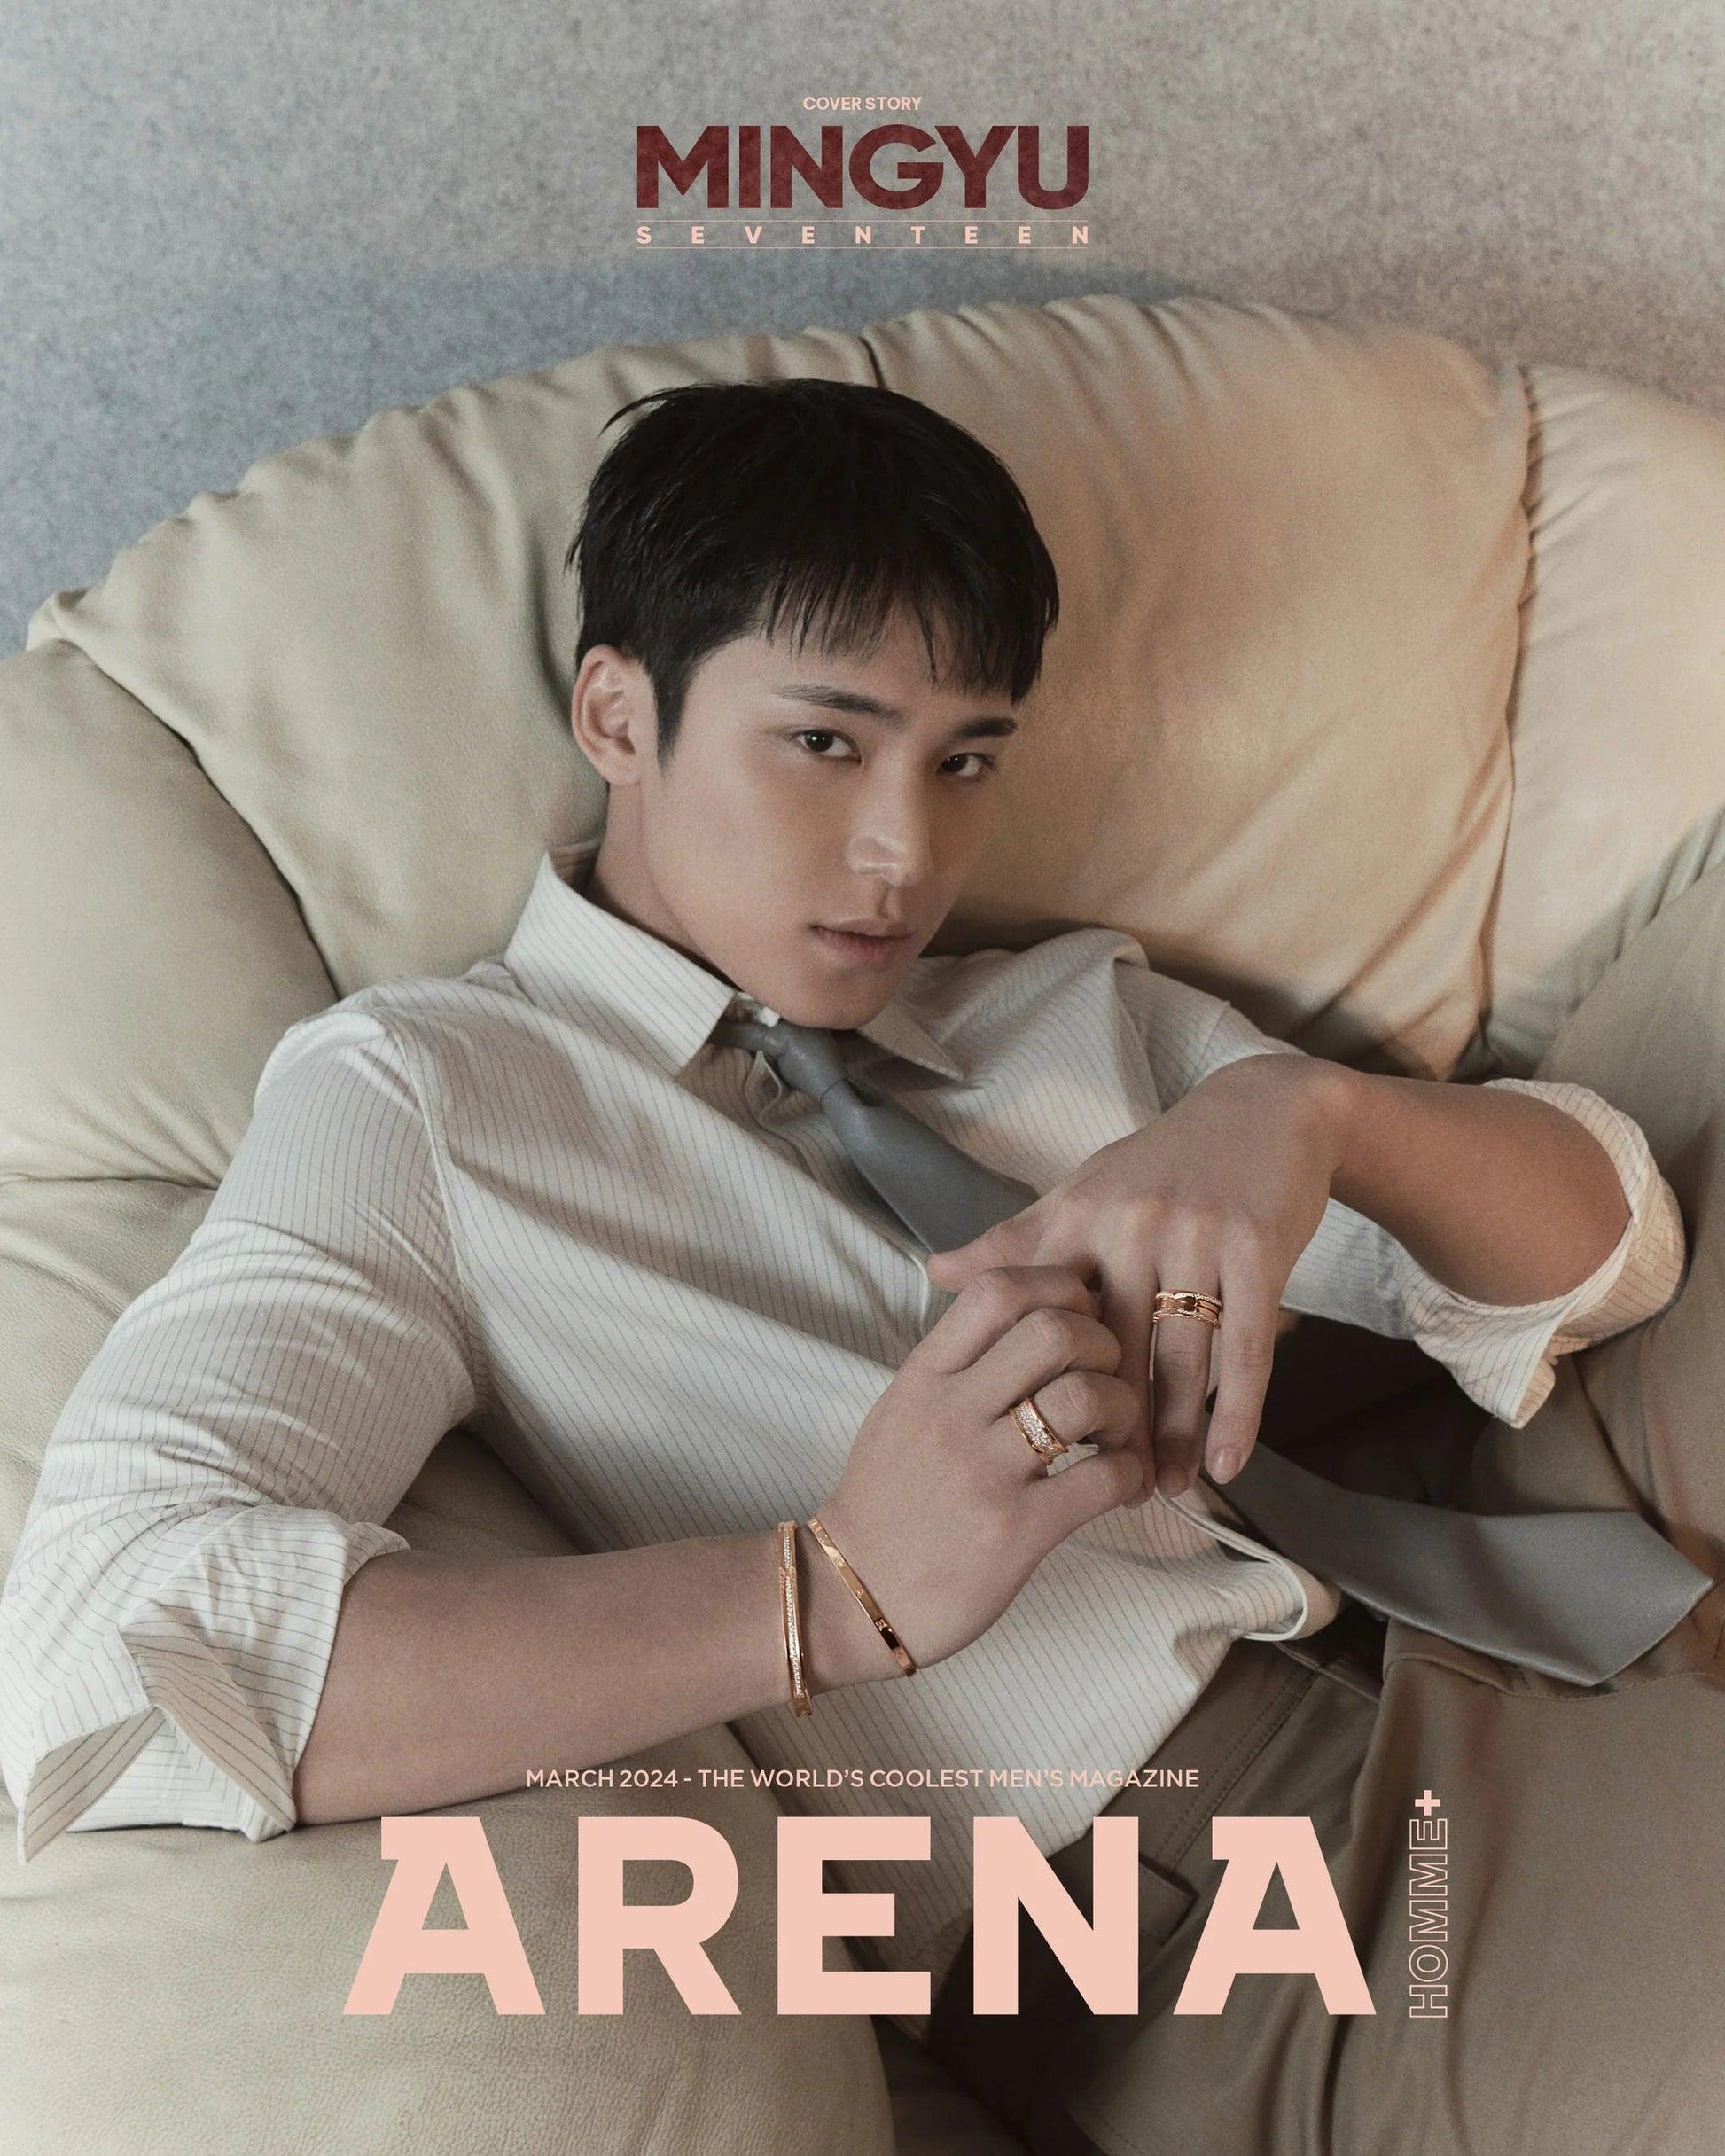 MINGYU (SEVENTEEN) - ARENA HOMME MAGAZINE COVER - (2024 March Issue) - KAEPJJANG SHOP (캡짱 숍)